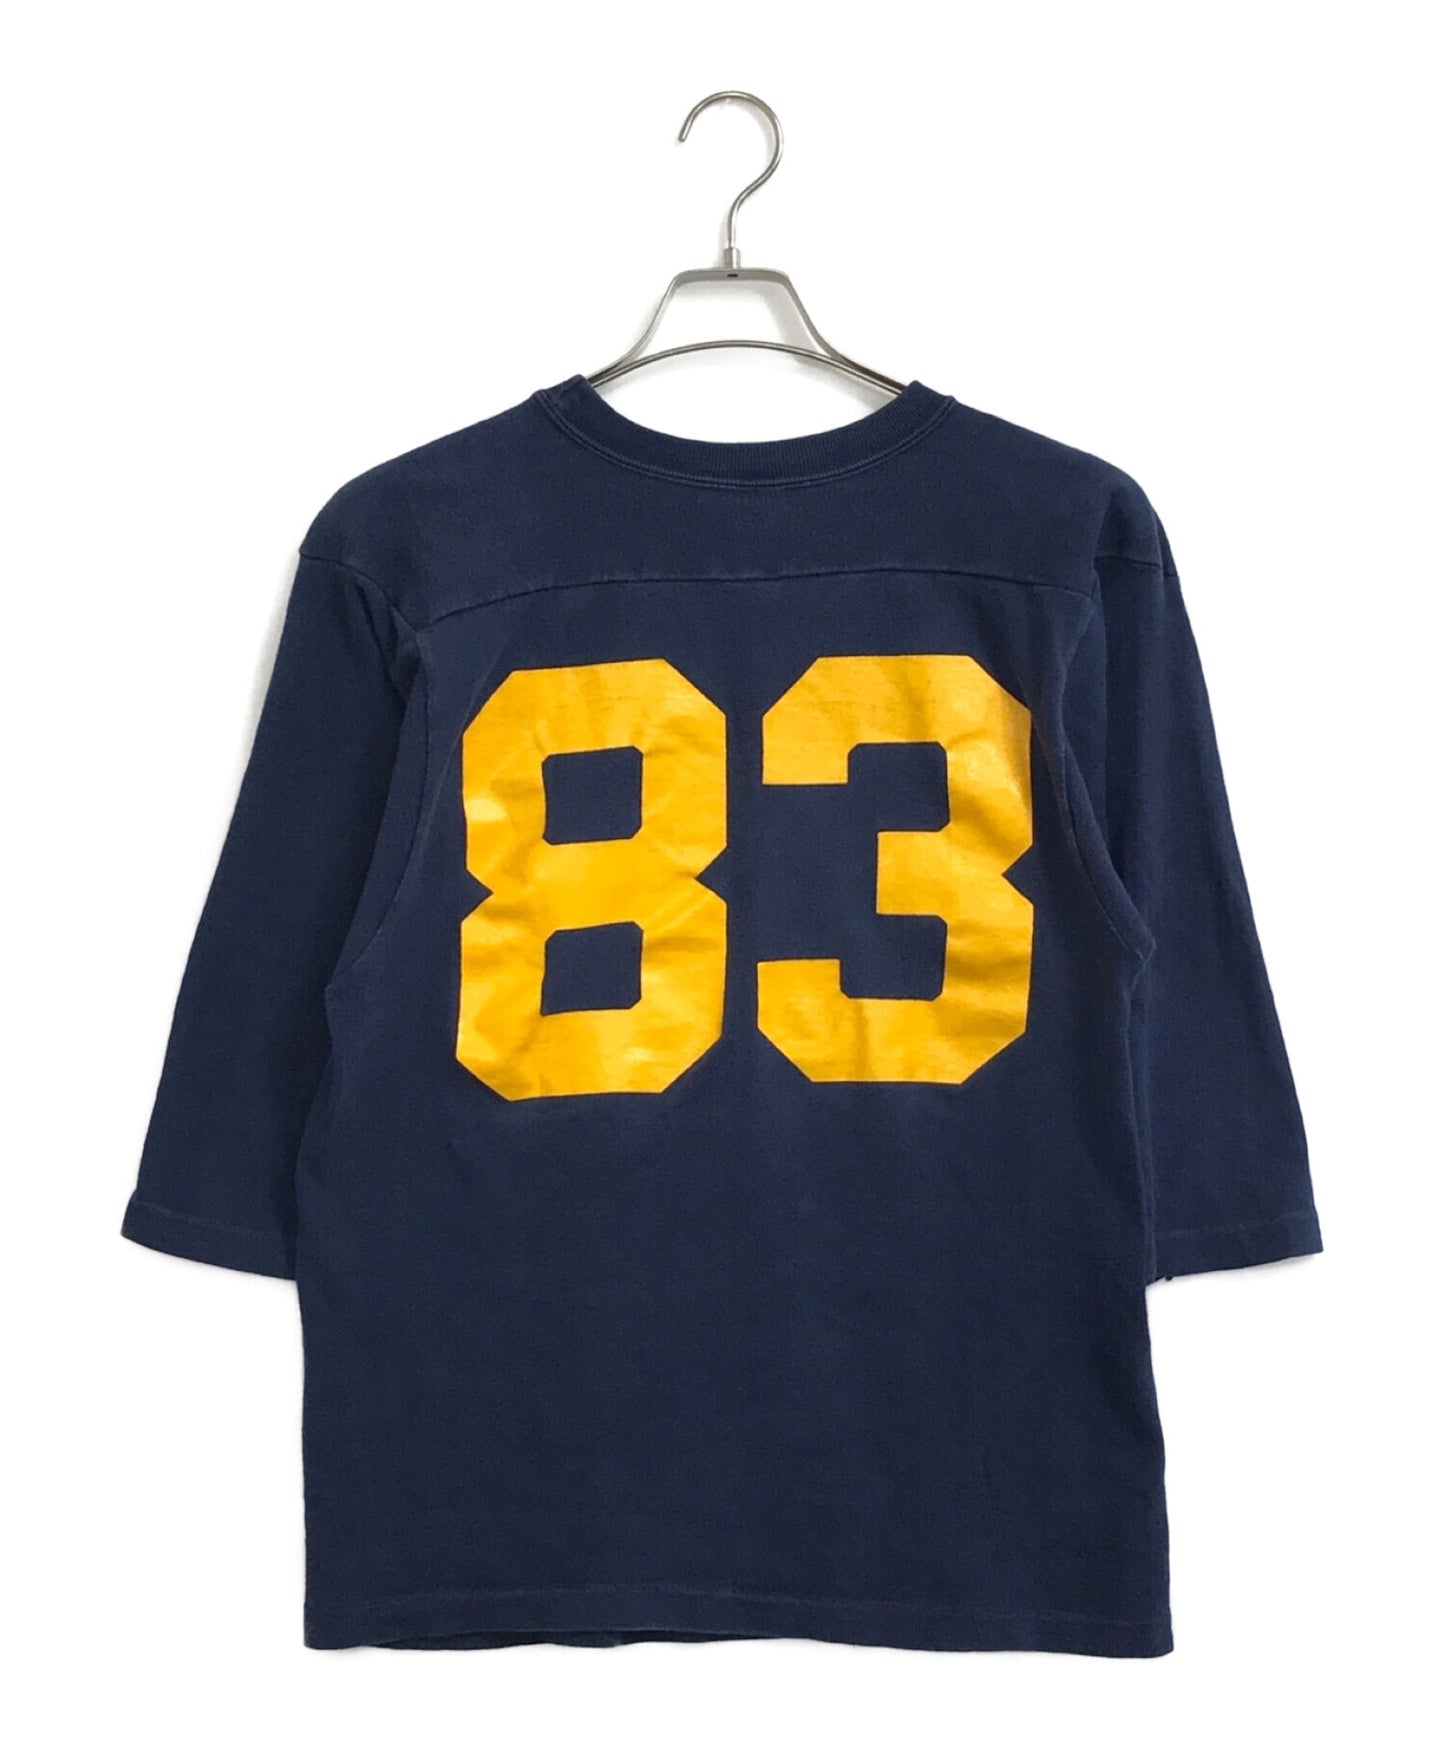 [Pre-owned] Champion 70s U.S. Navy Football Tee